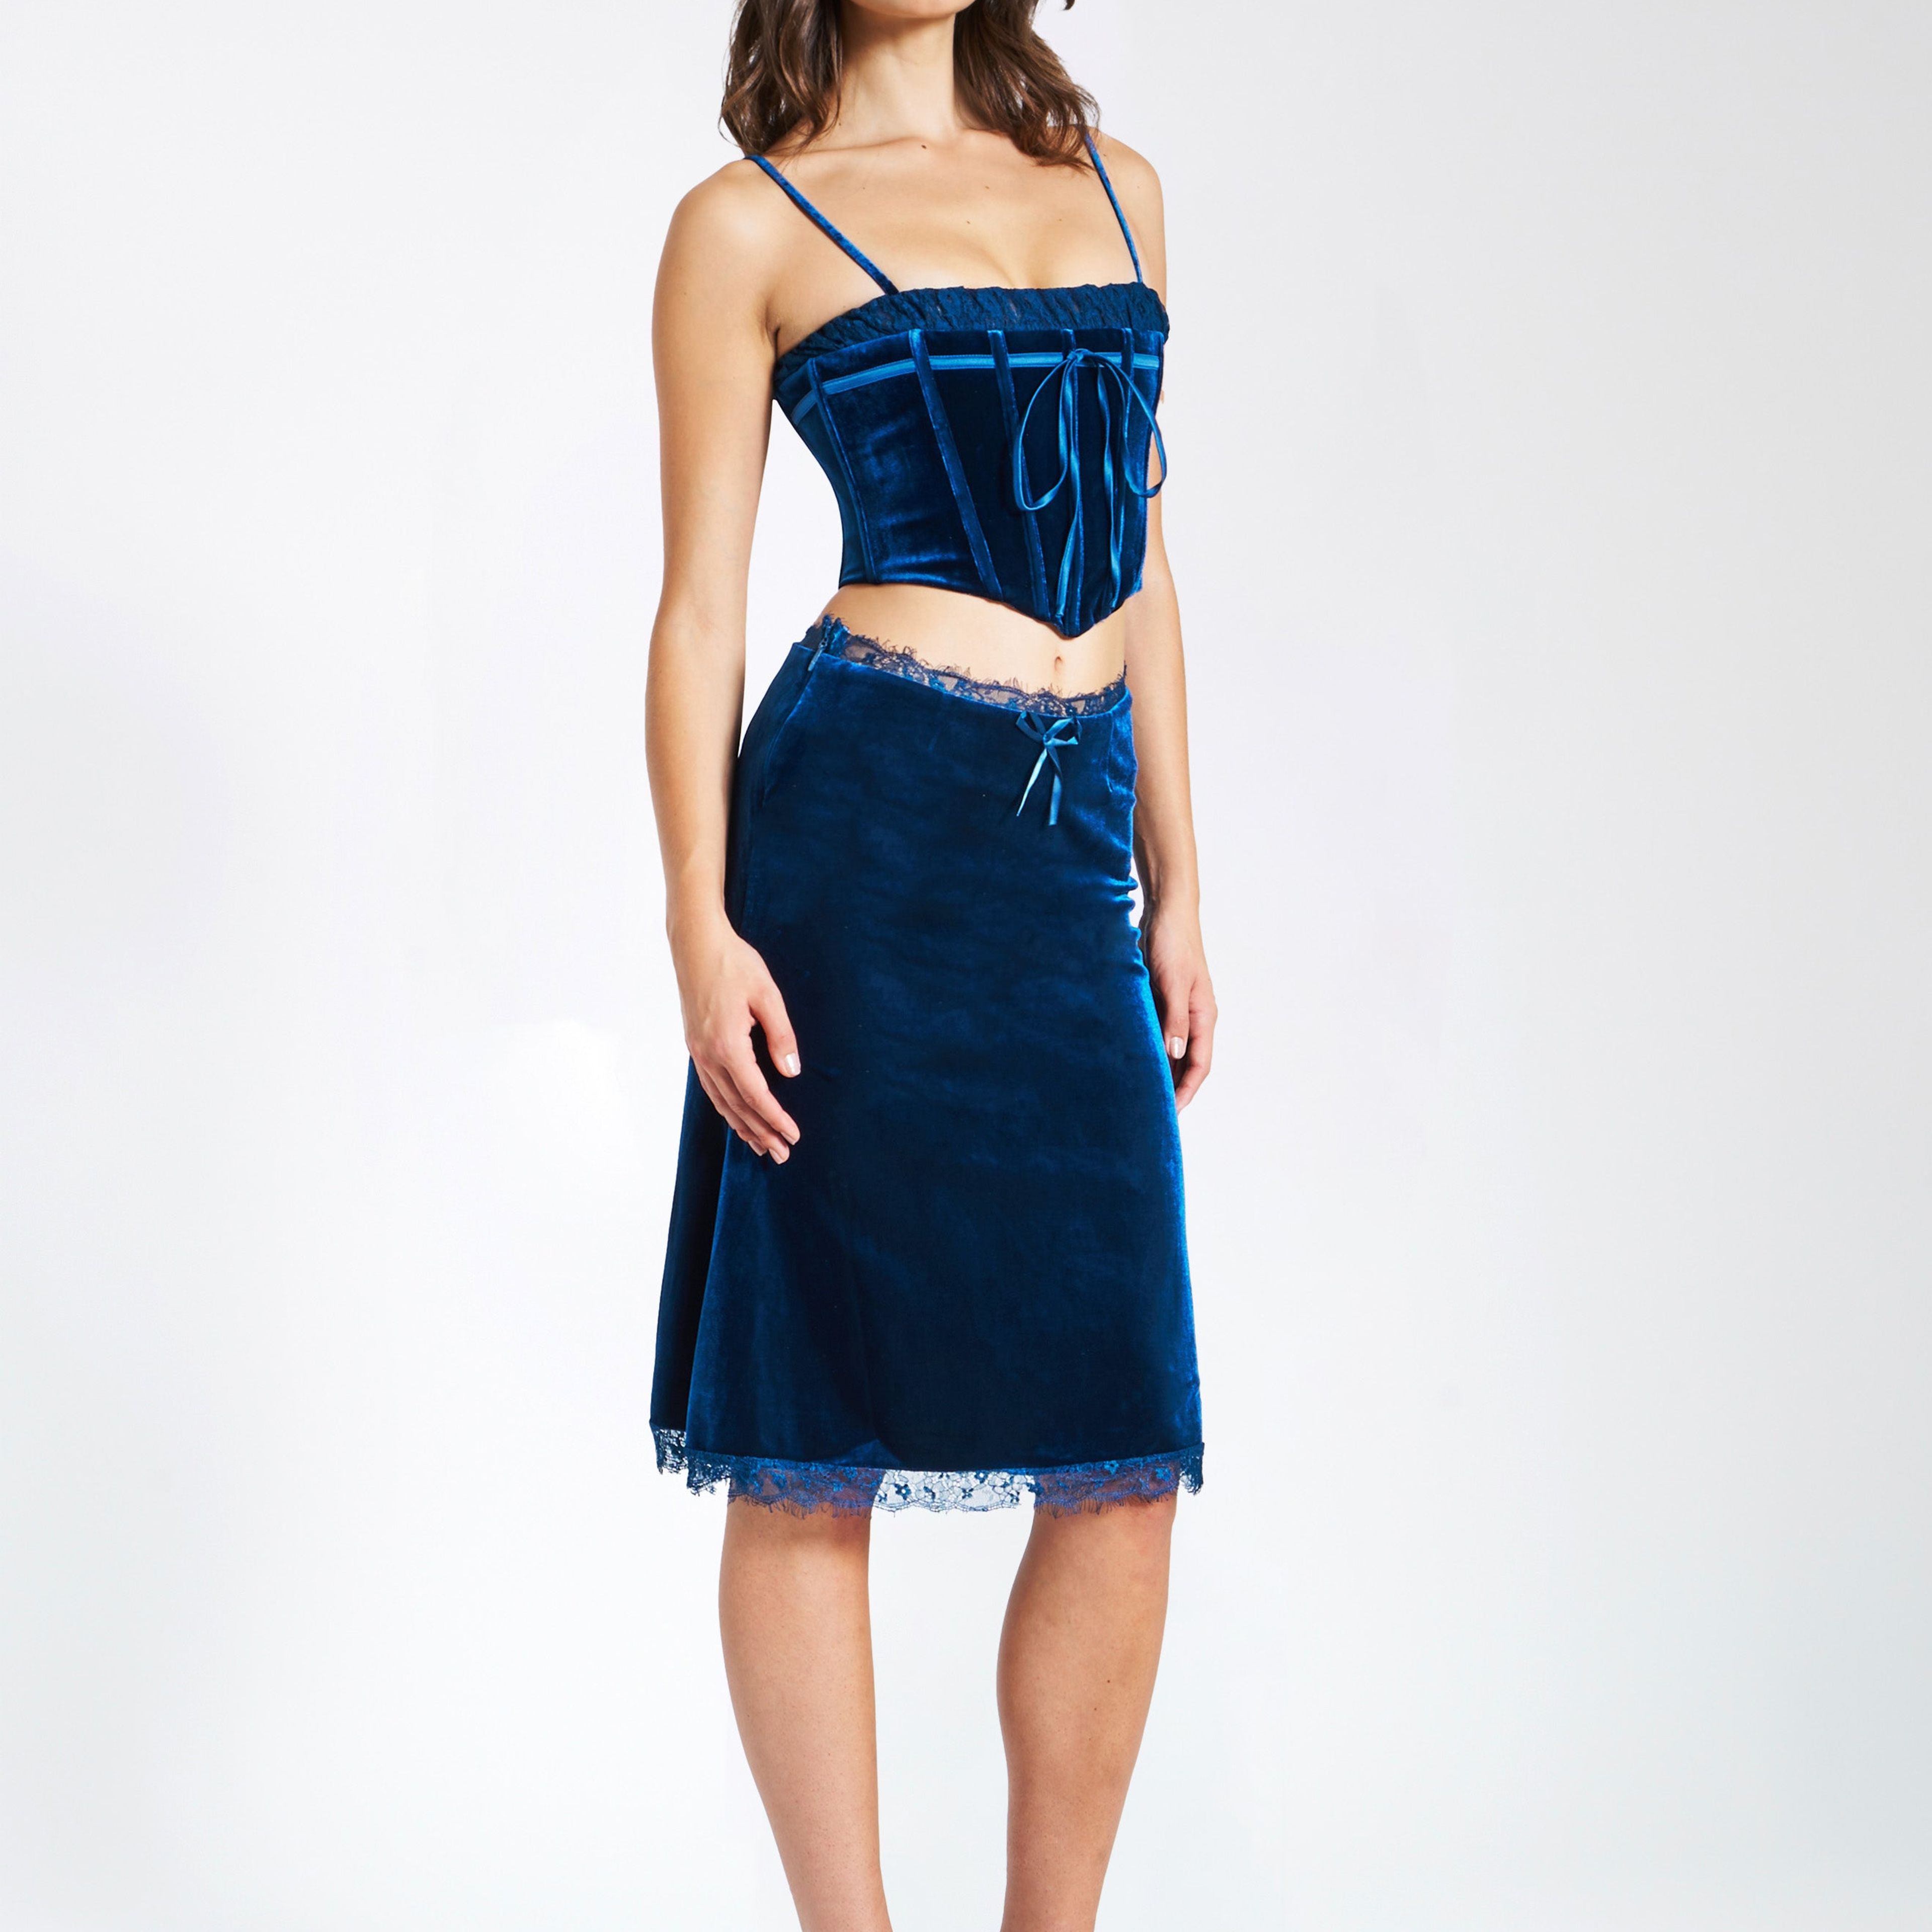 Miss Circle Londyn Teal Velvet Corset Top With Lace Trim on Marmalade